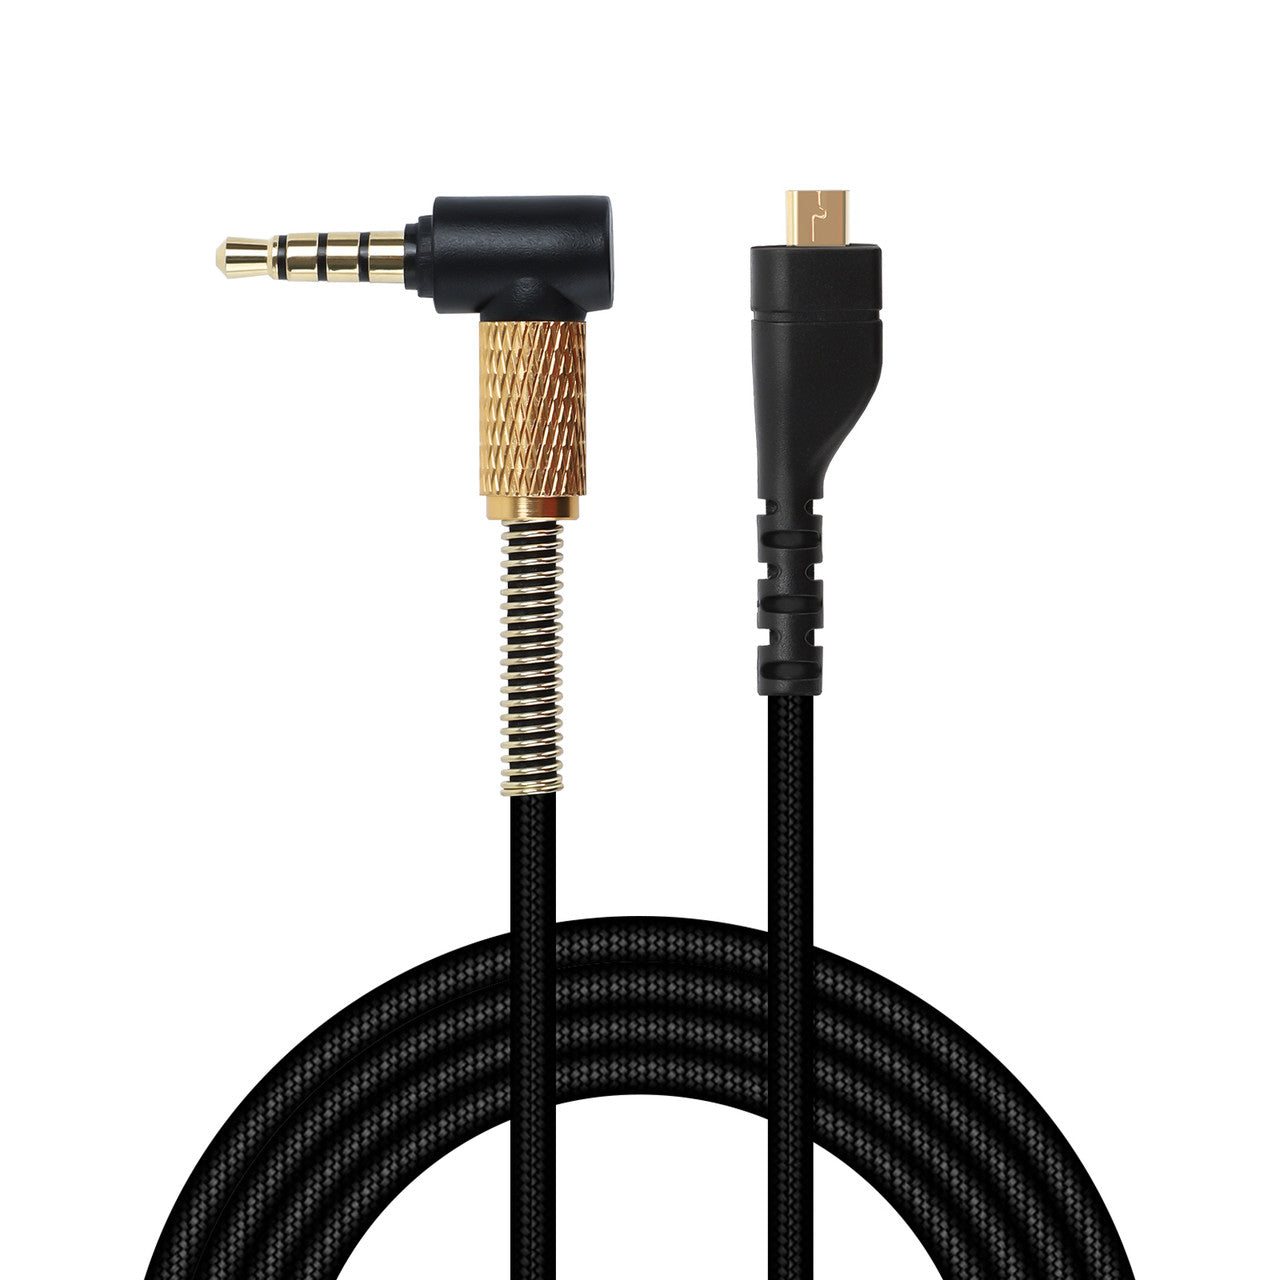 Replacement Audio Cable Fit for SteelSeries Arctis 3, Arctis Pro Wireless, Arctis 5, Arctis 7, Arctis Pro Gaming Headset, PS4, Xbox One, Mac, 1.5m/4.9ft